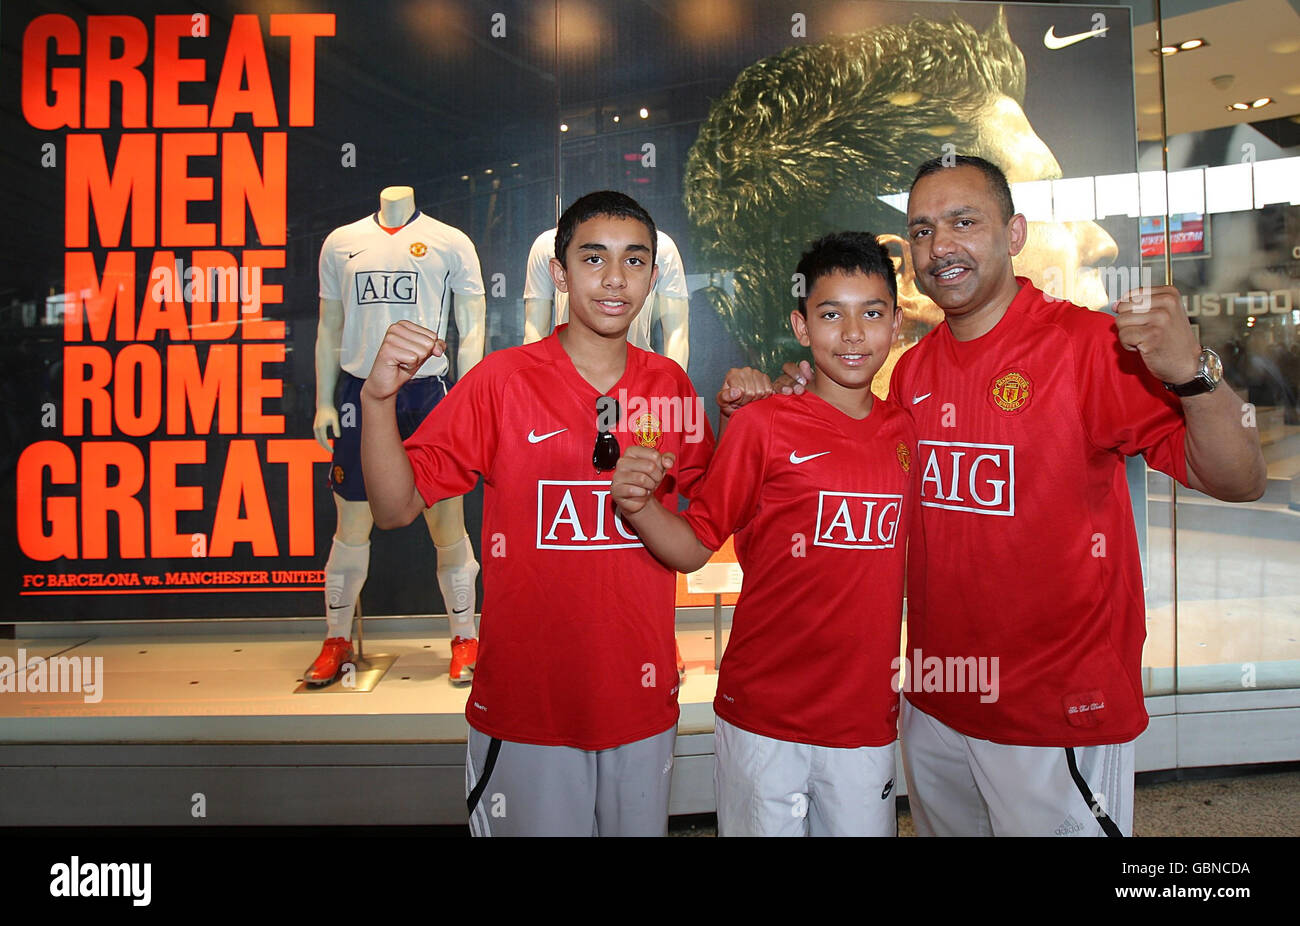 Three Manchester United fans outside a Nike shop in Rome Stock Photo - Alamy